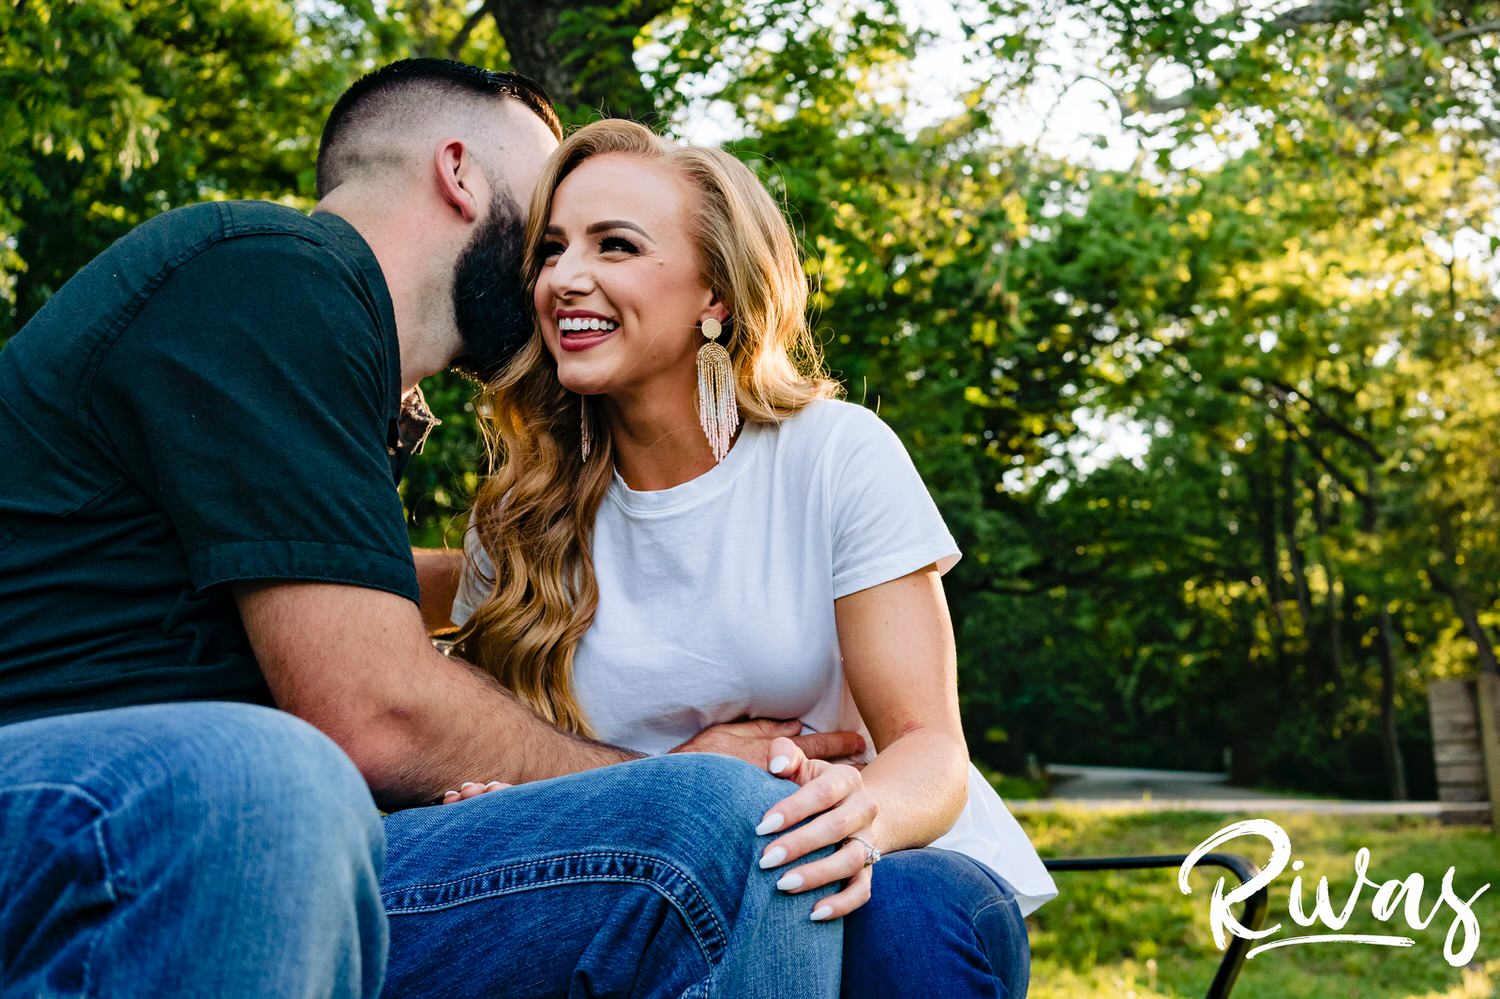 A colorful, candid picture of a man whispering into his fiance's ear as they sit on a bench surrounded by greenery during their summer engagement session with their wedding photographer. 